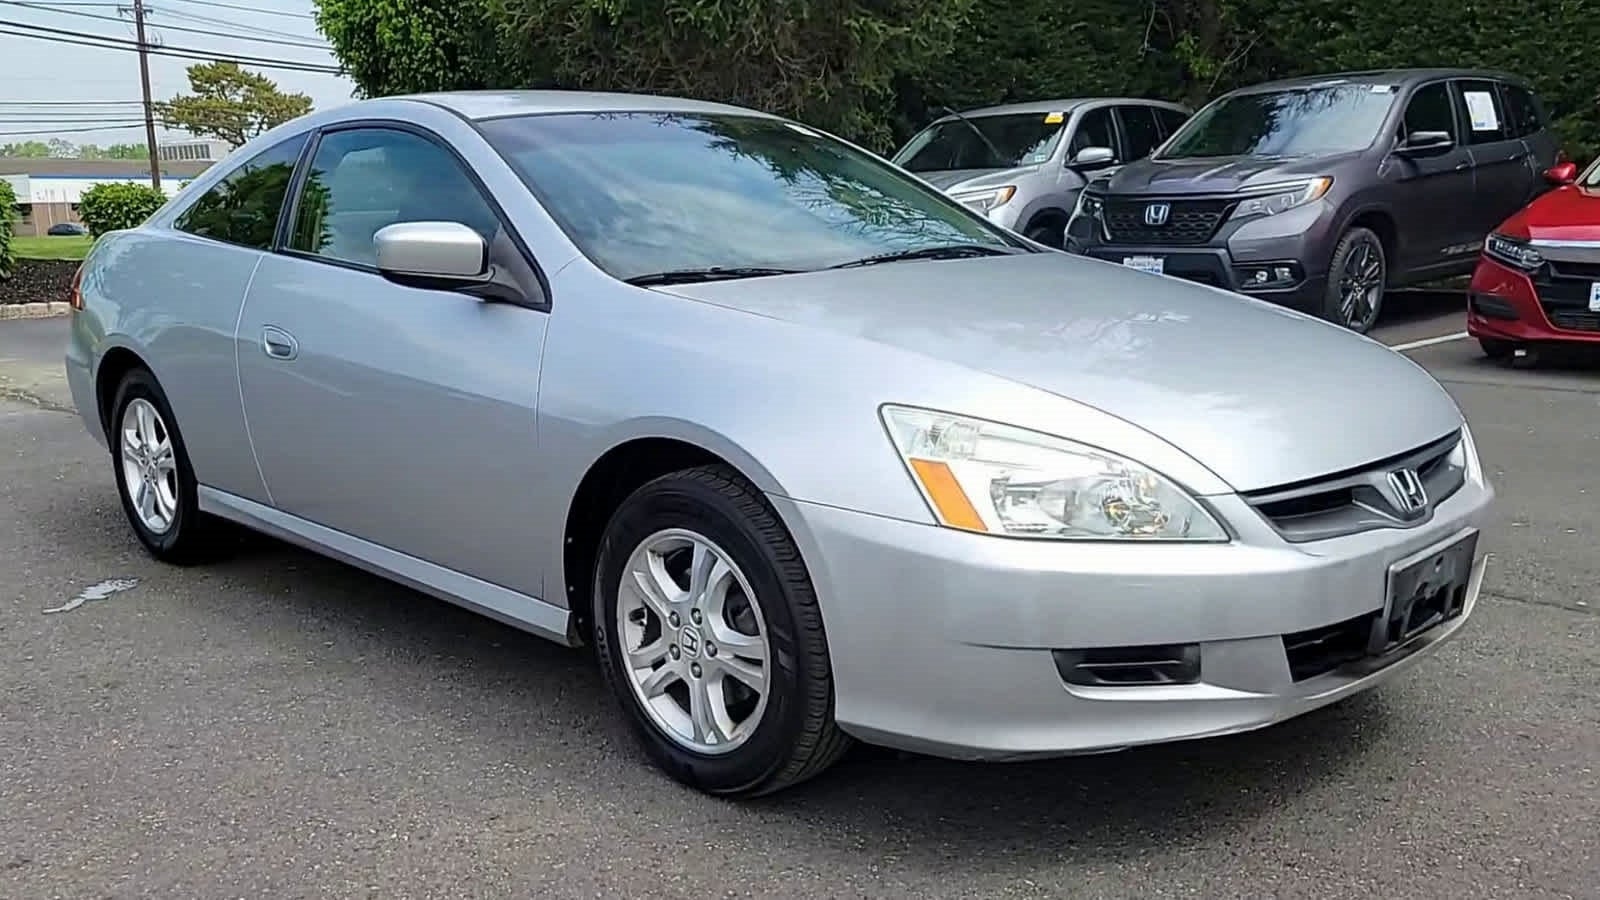 Used 2007 Honda Accord LX with VIN 1HGCM72357A019960 for sale in Hamilton Township, NJ